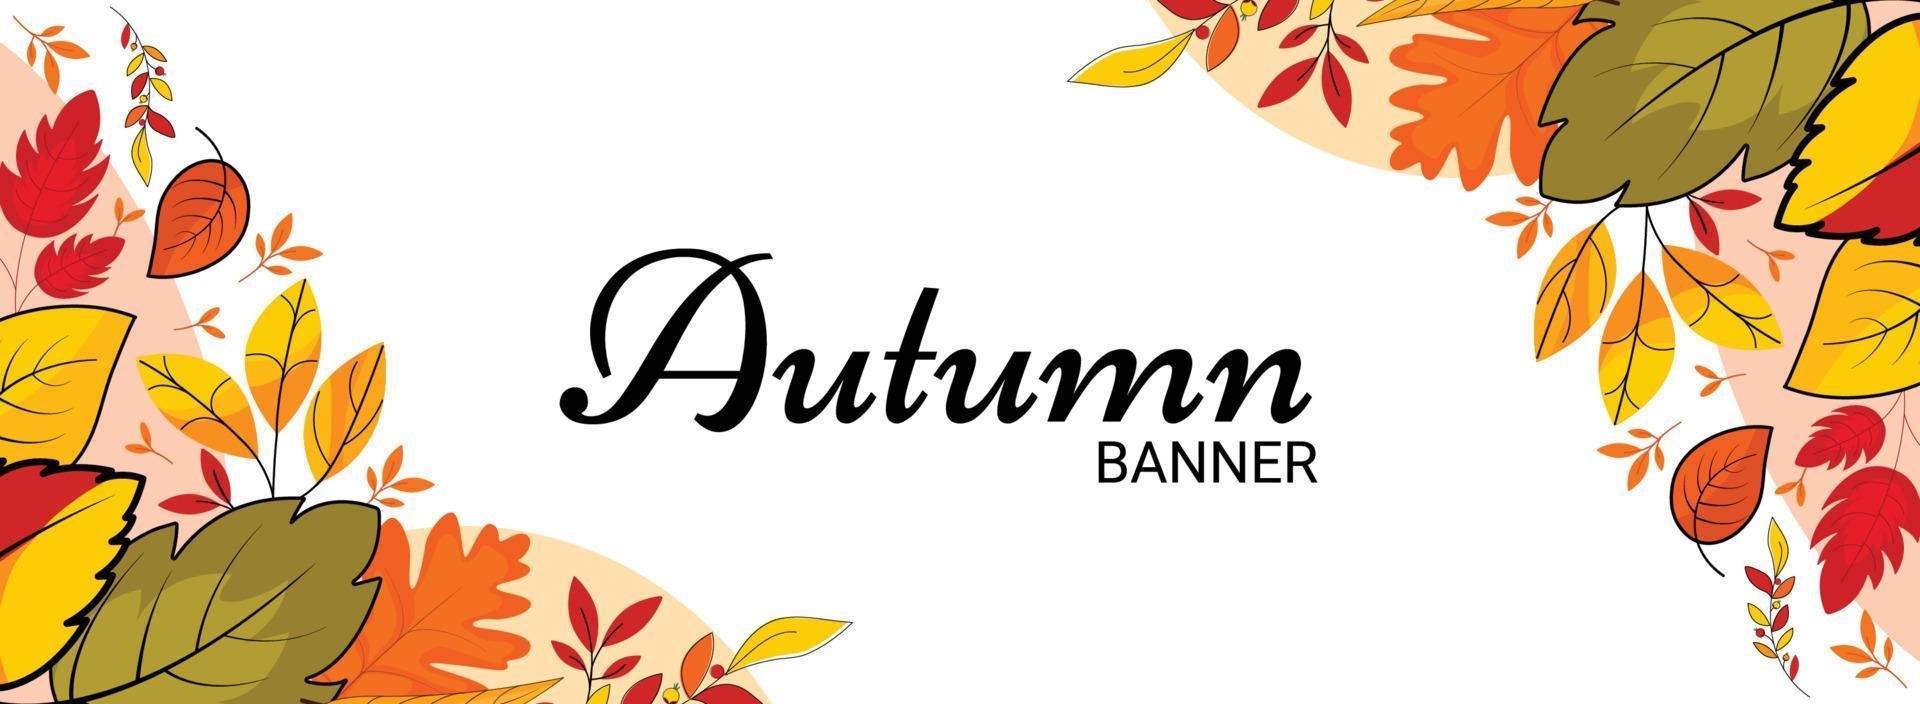 Autumn banner with seasonal fall leaves background vector